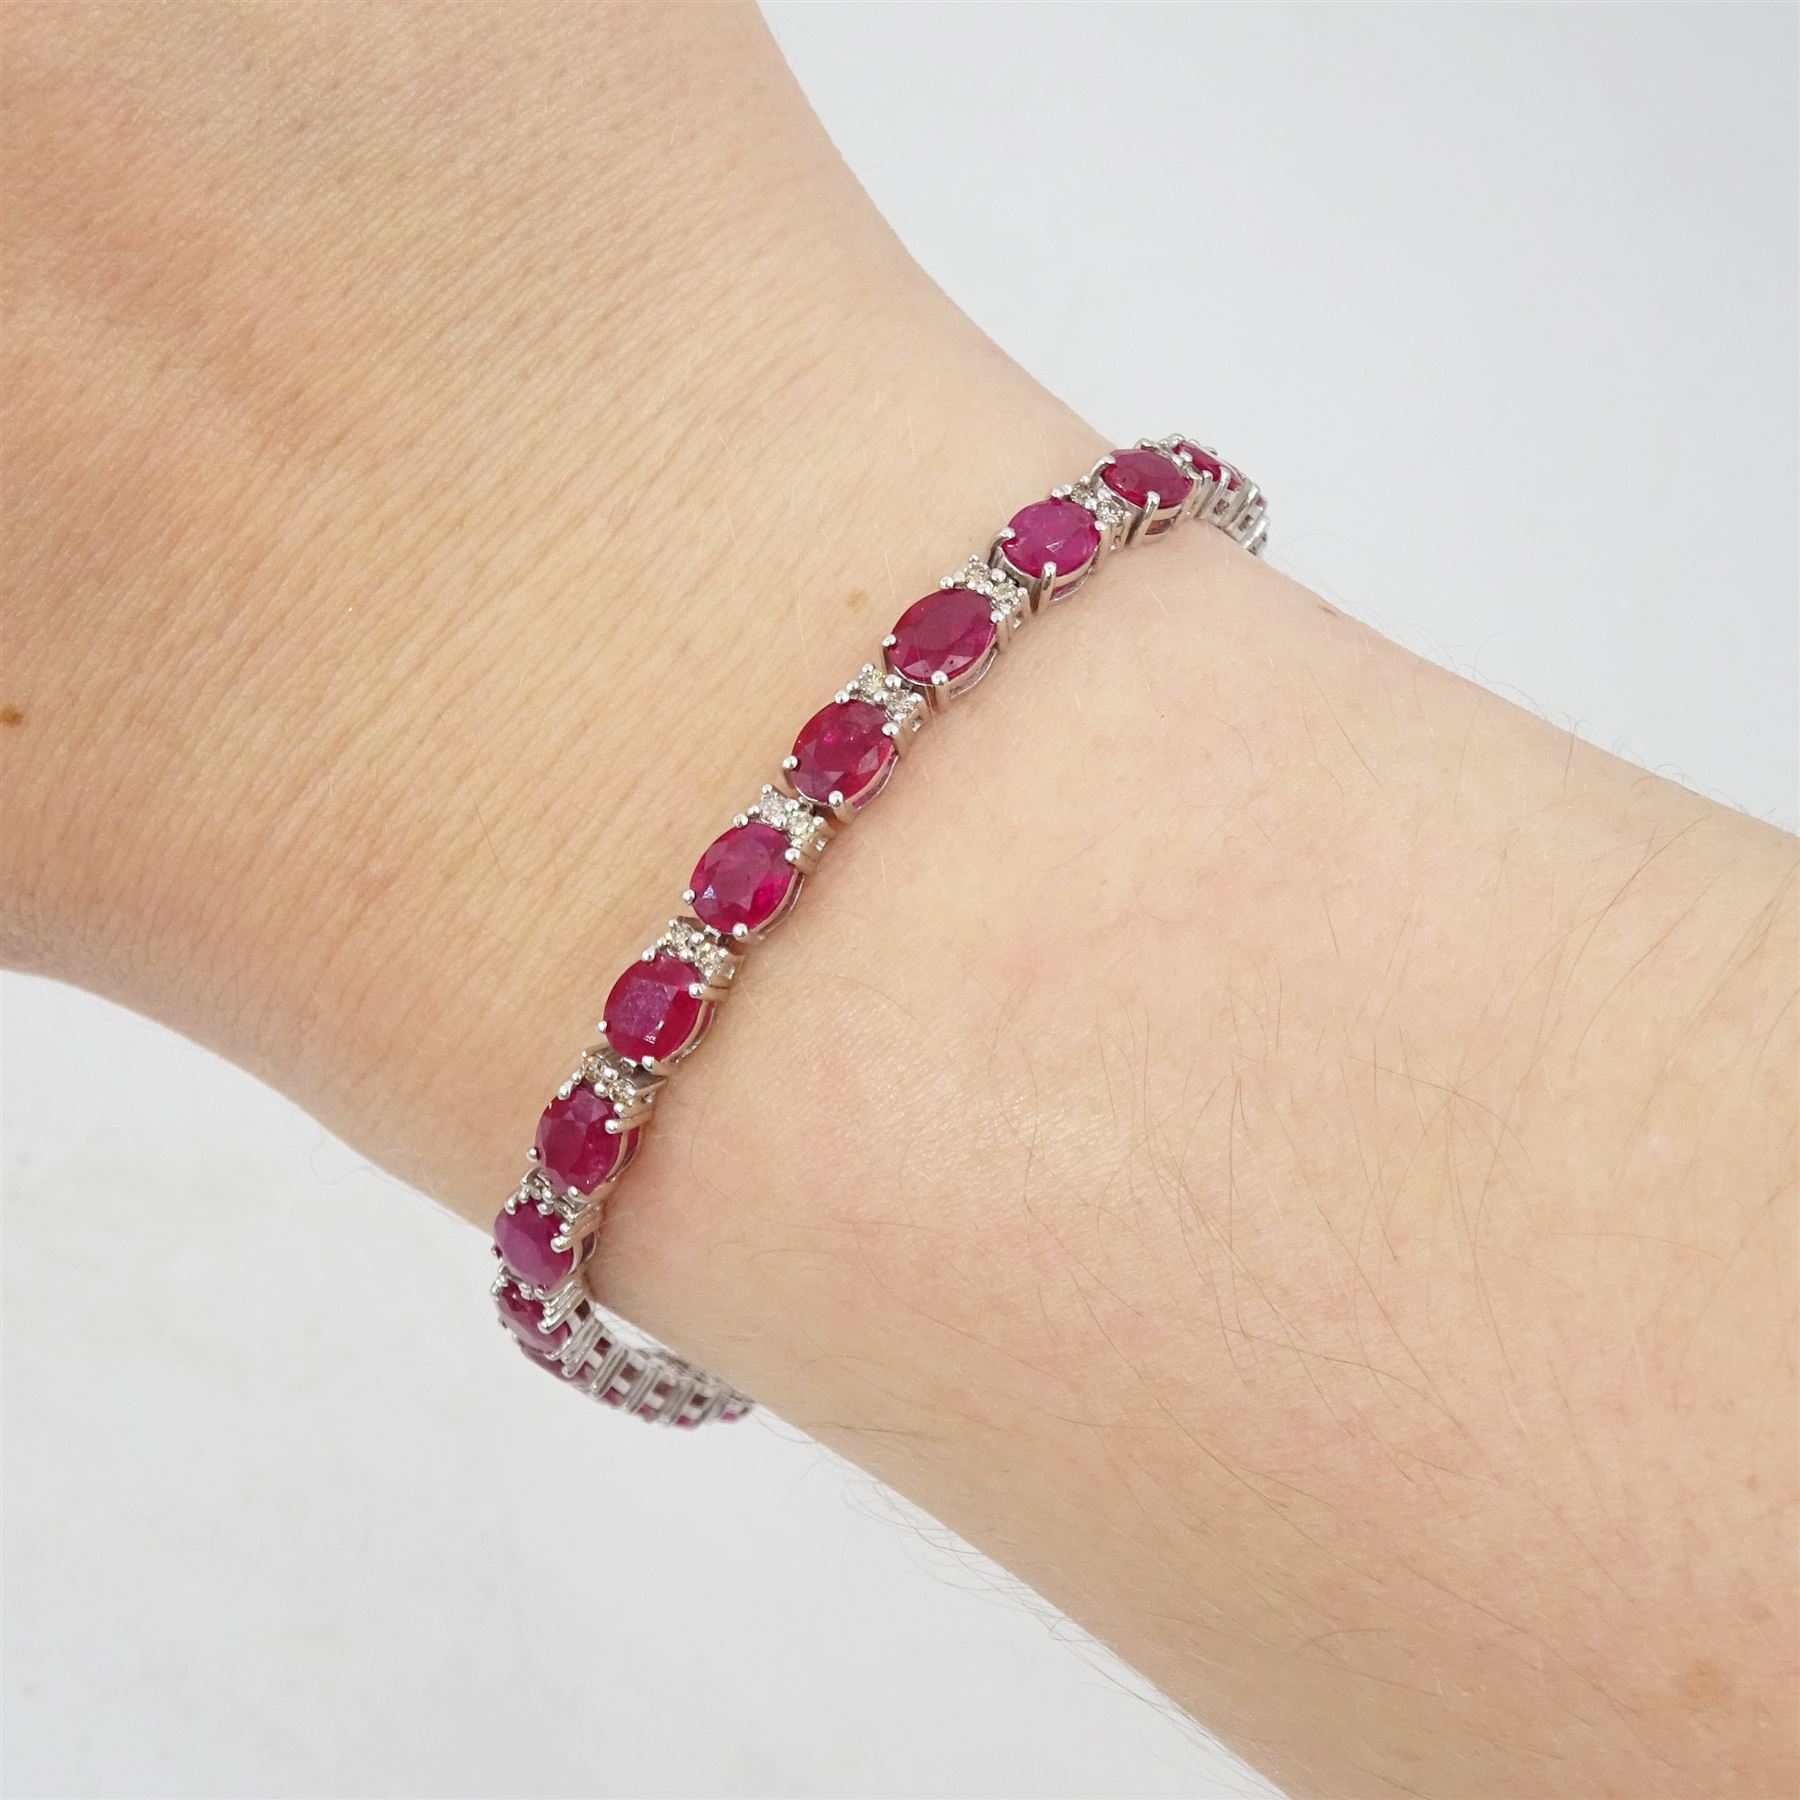 18ct white gold oval ruby and diamond bracelet - Image 3 of 3